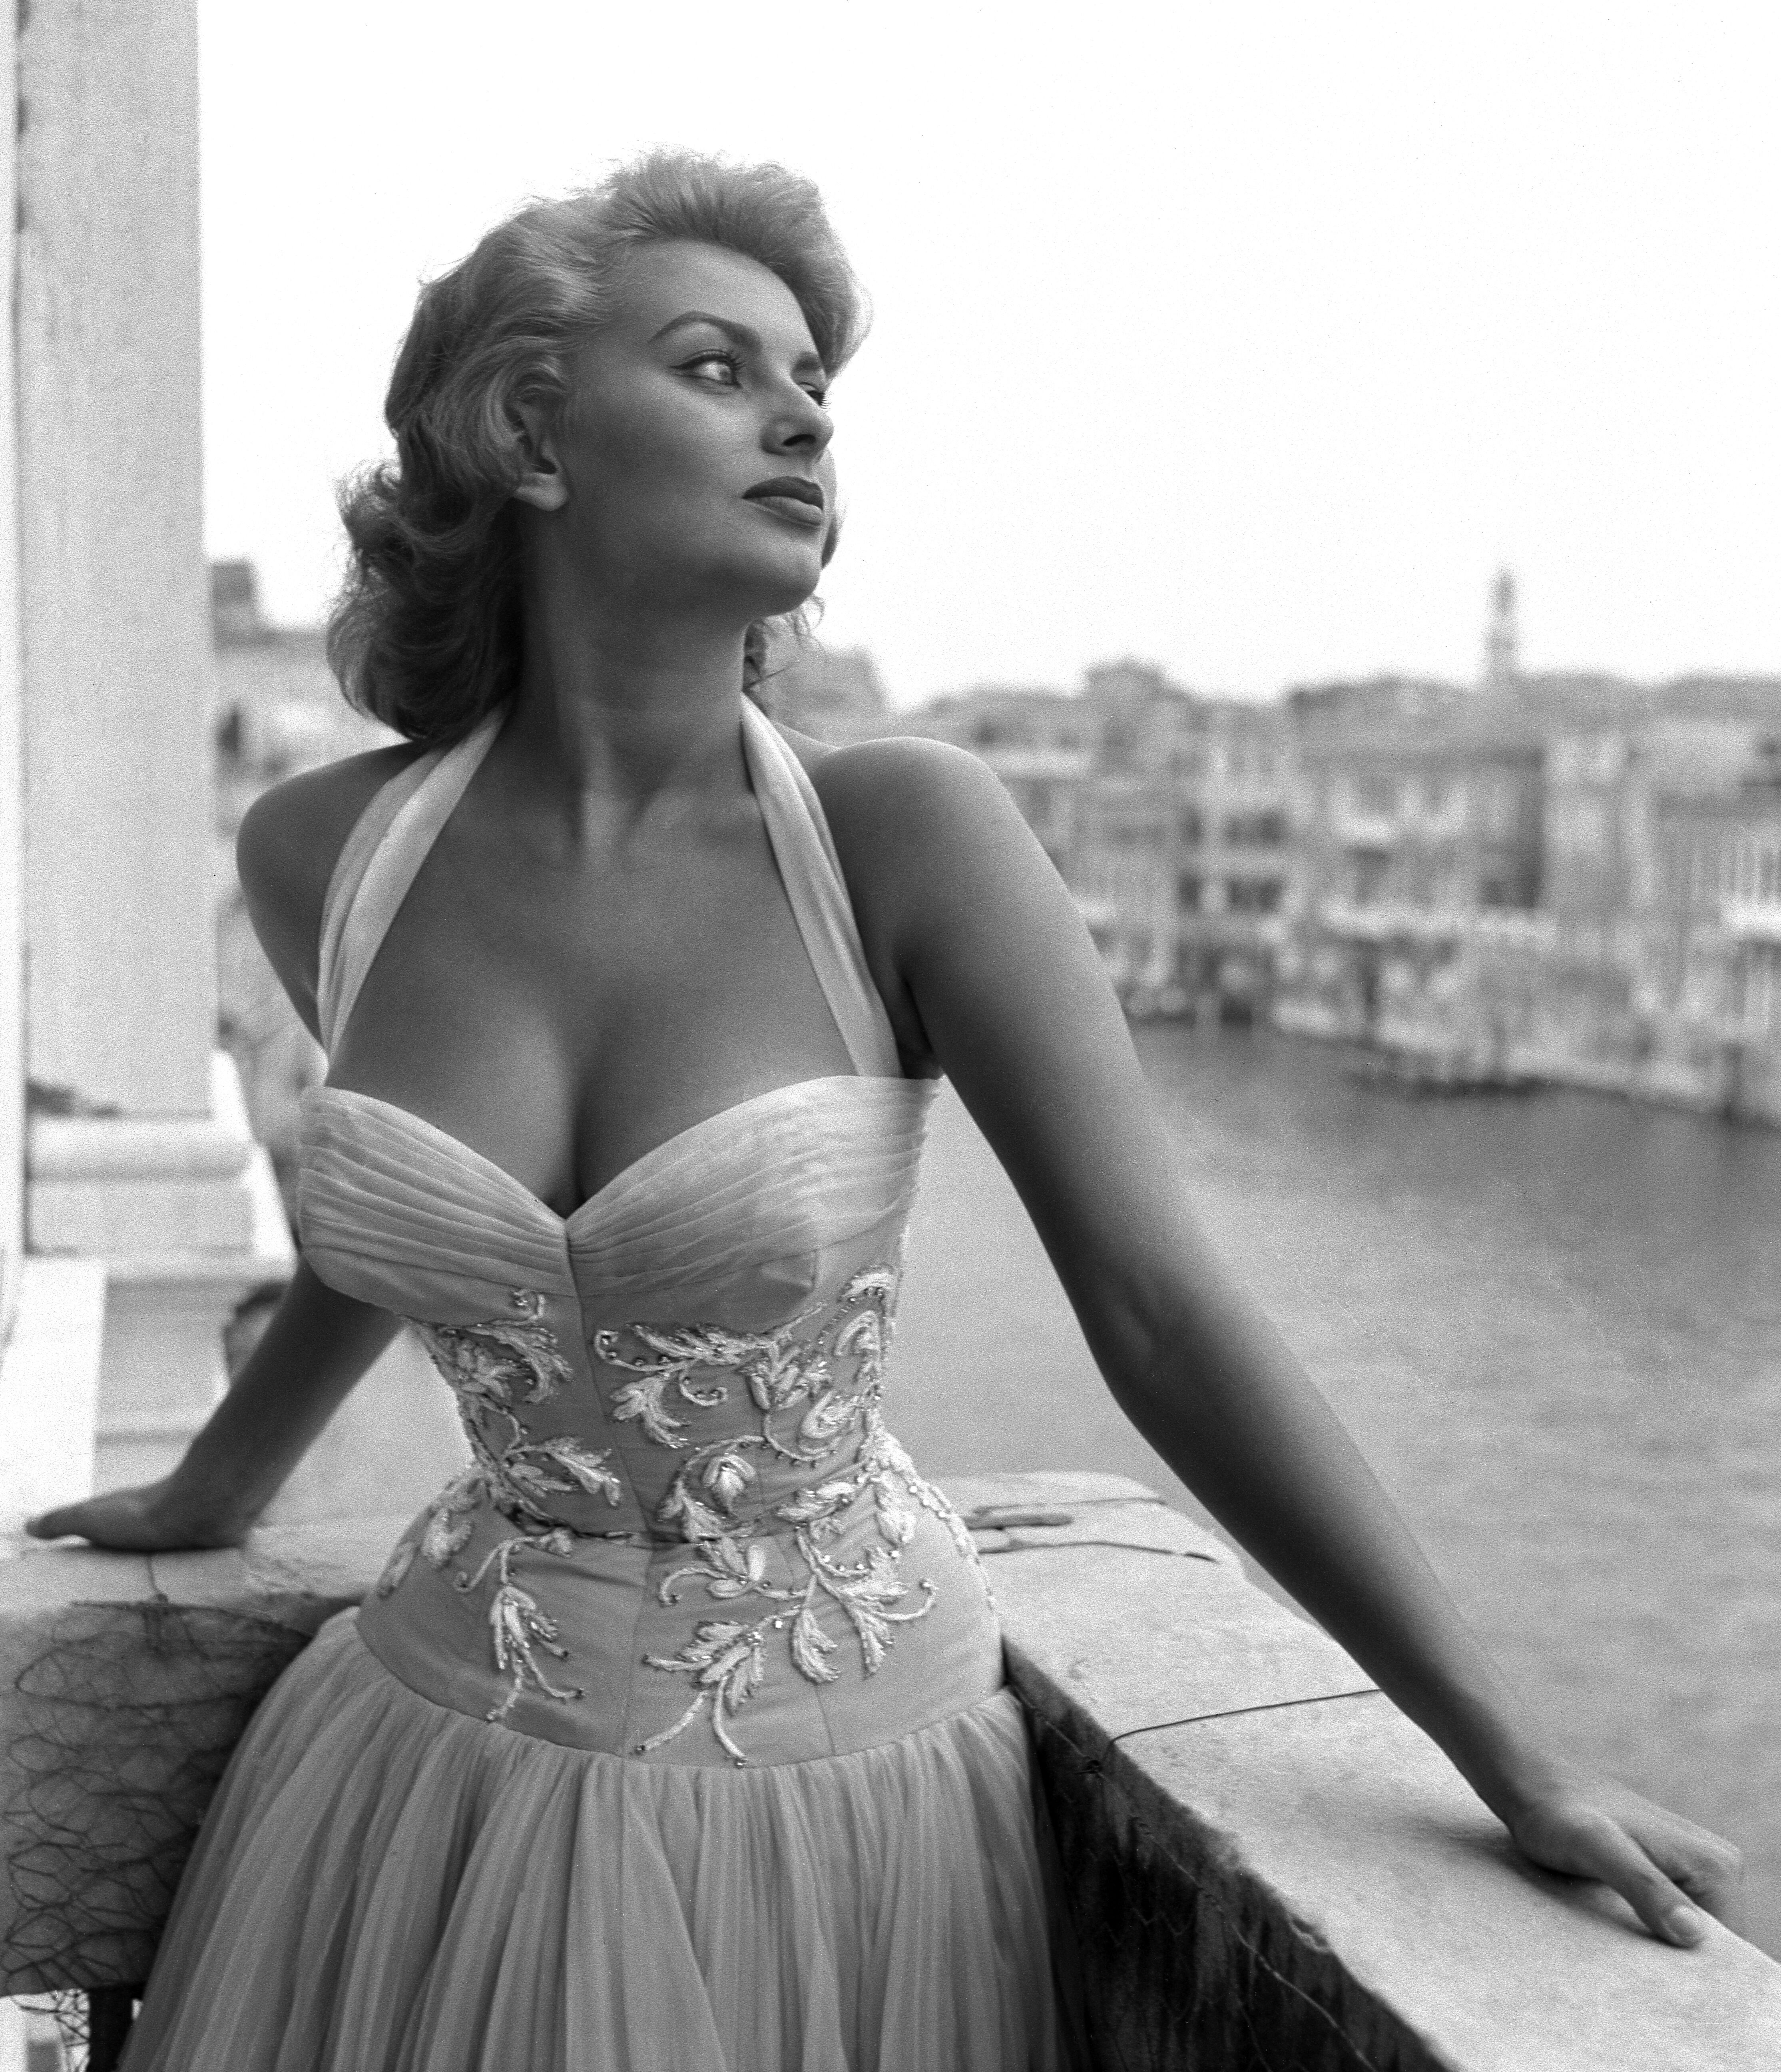  Sophia Loren on a terrace on the Canal Grande in Venice, 1955 | Source: Getty Images